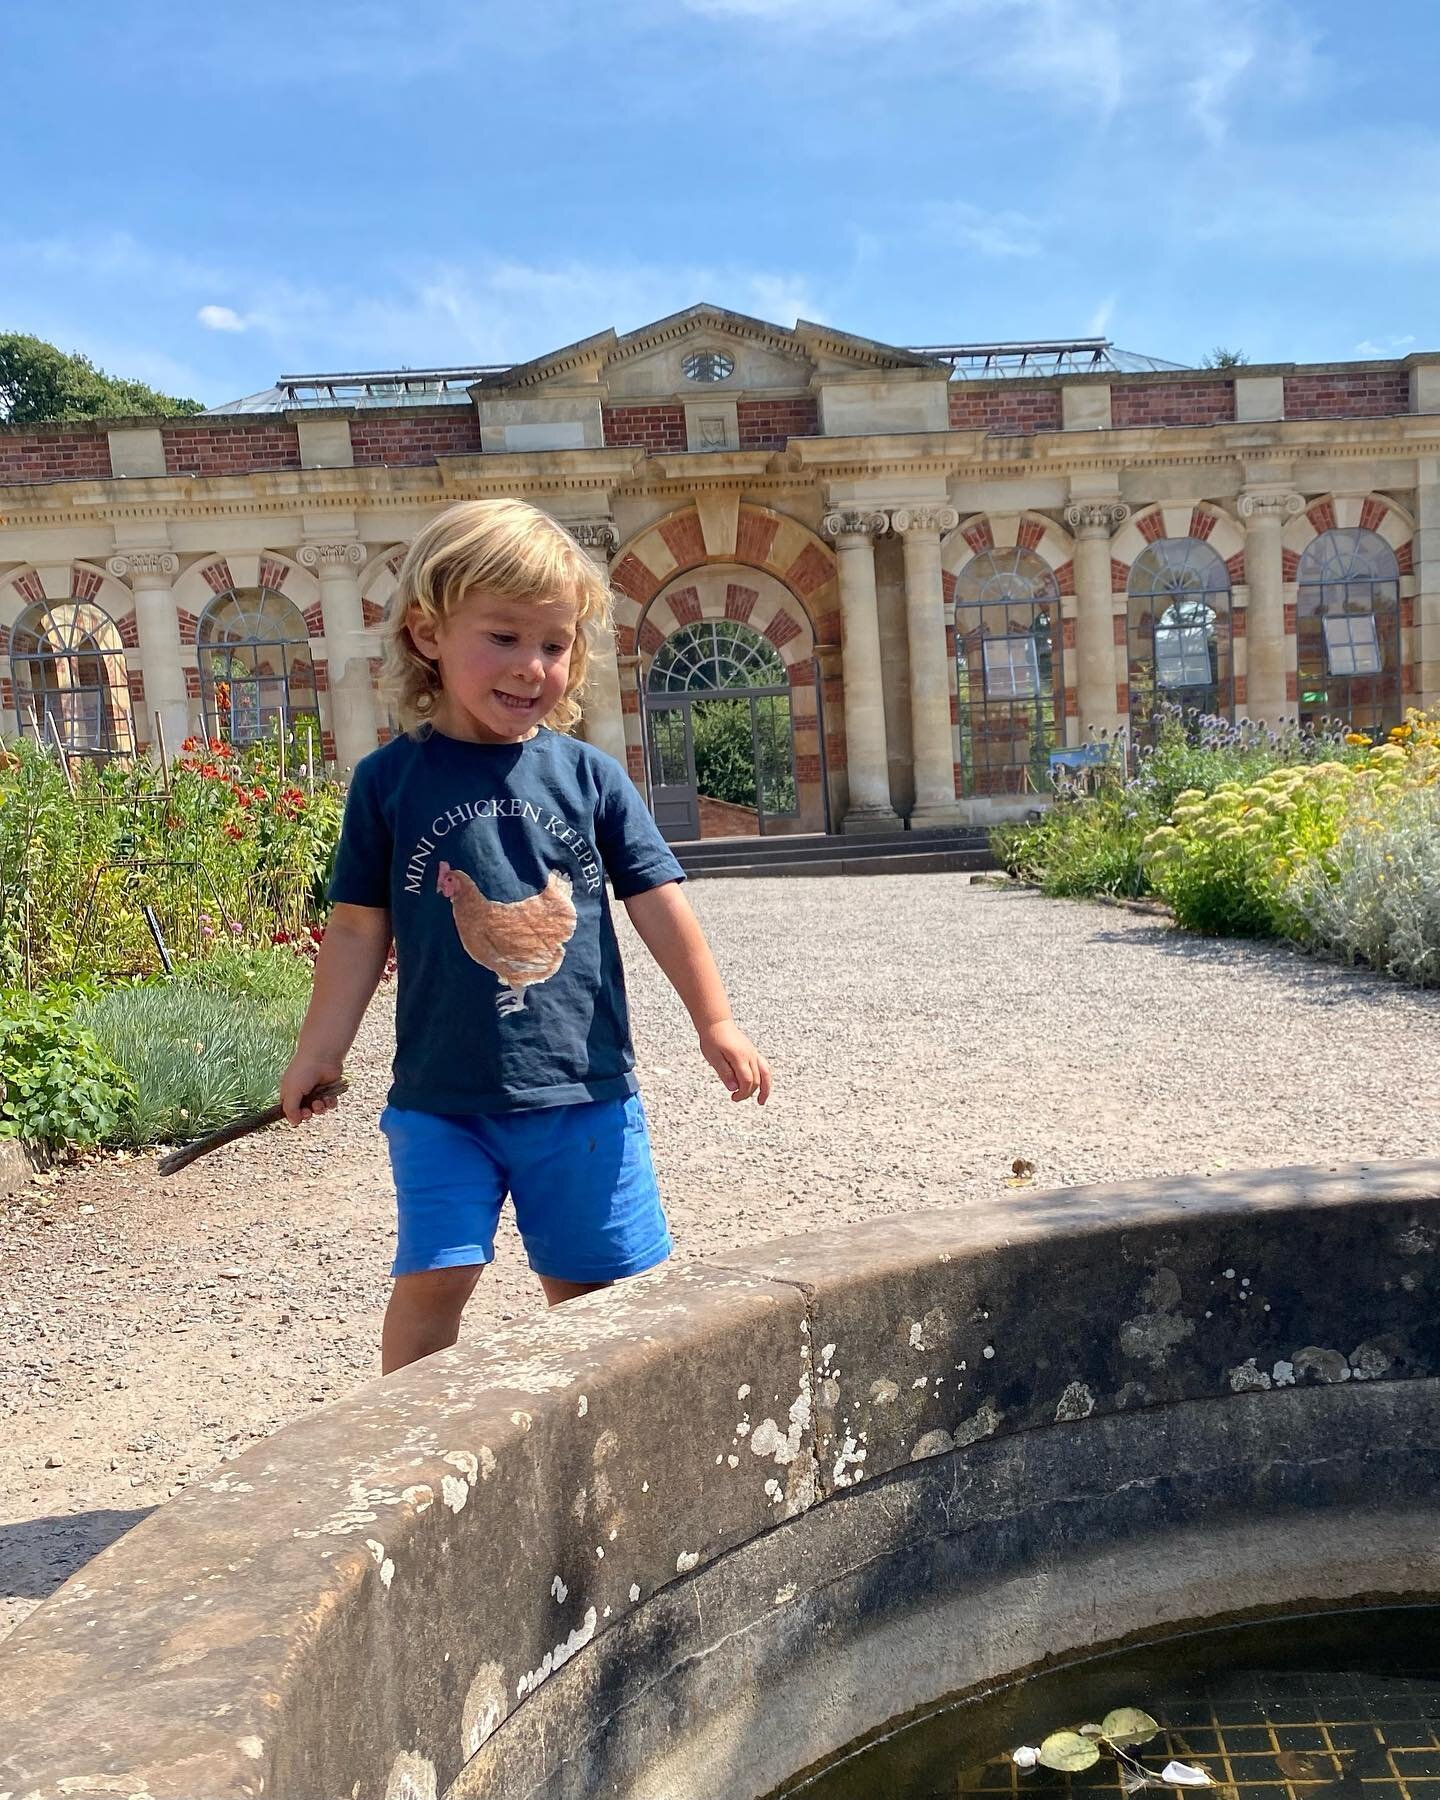 ☀️🐓Mini Chicken Keeper Adventures🐓☀️
.
Summer hols in full swing, we had great fun checking out the gardens at @tyntesfieldnt yesterday! 
.
The Mini Chicken Keeper design is available on t-shirts, sweatshirts, hooded tops and long sleeved tops.  Th